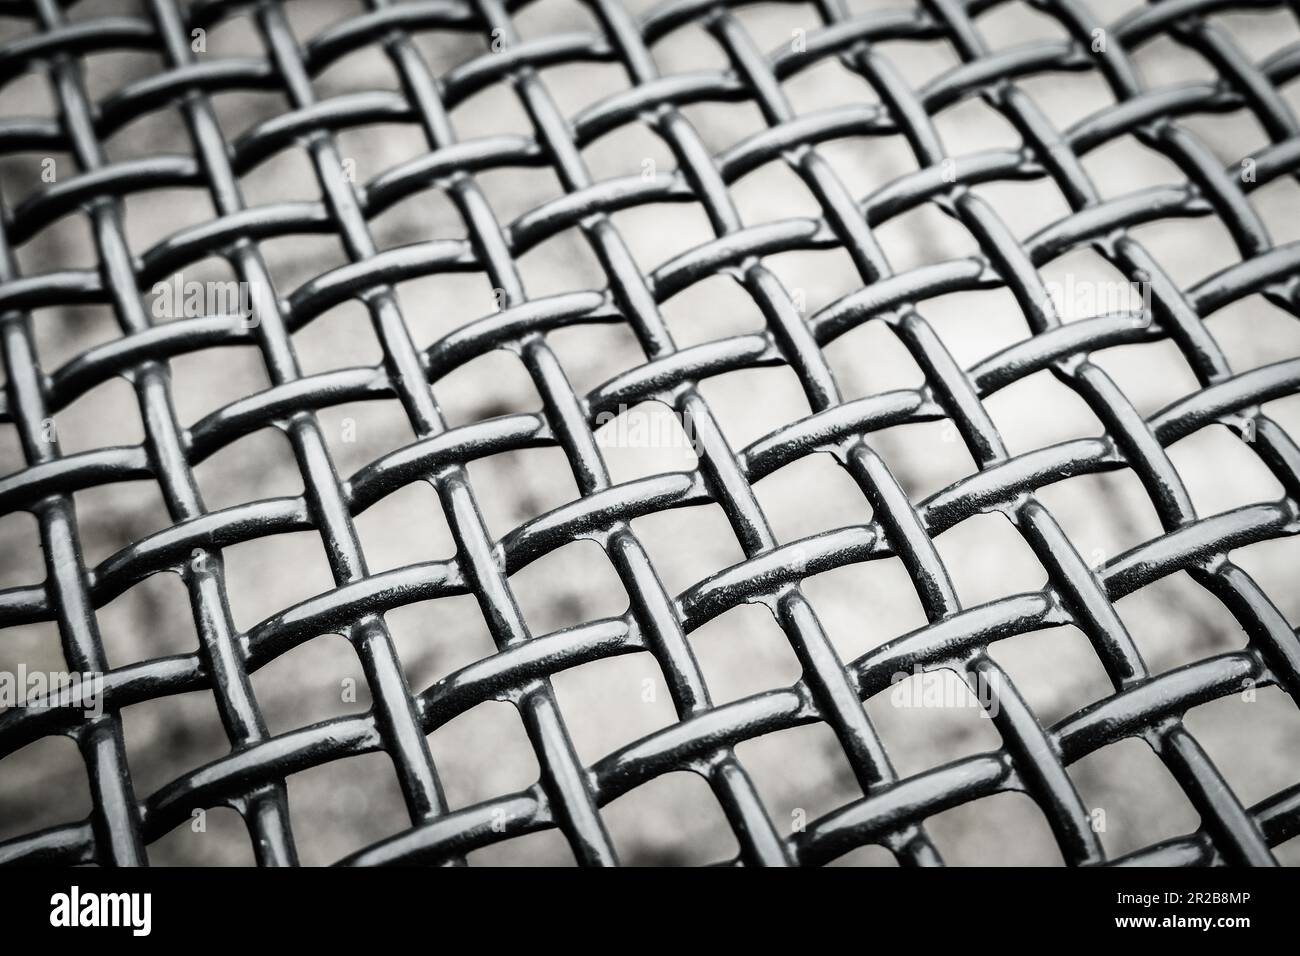 A grid structure is a framework made up of intersecting lines or bars that form a pattern of squares or rectangles. I Stock Photo